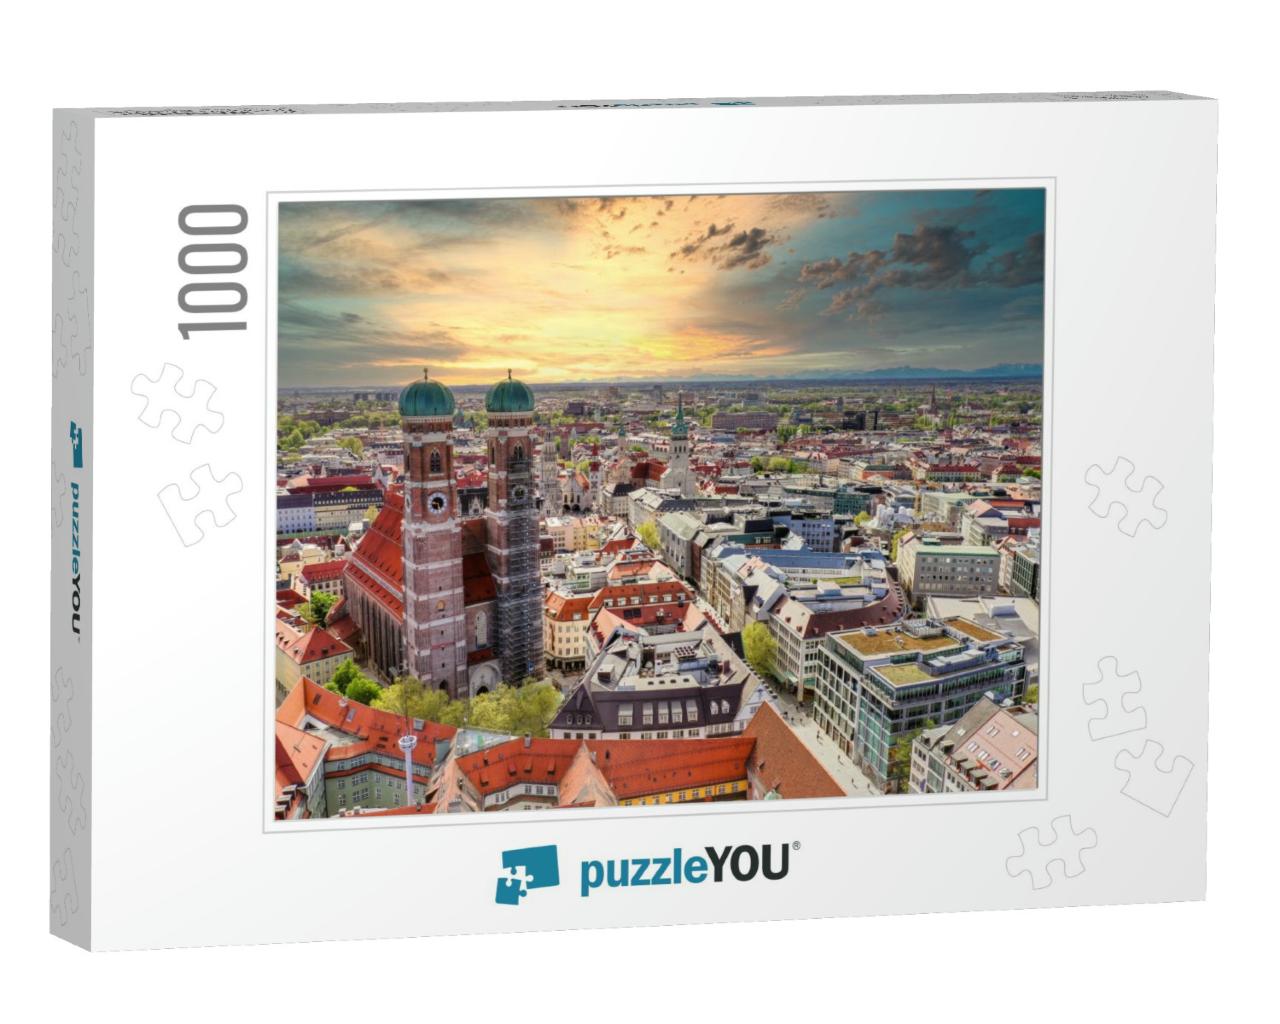 Munich Sunset Aerial View, Bavaria - Germany... Jigsaw Puzzle with 1000 pieces